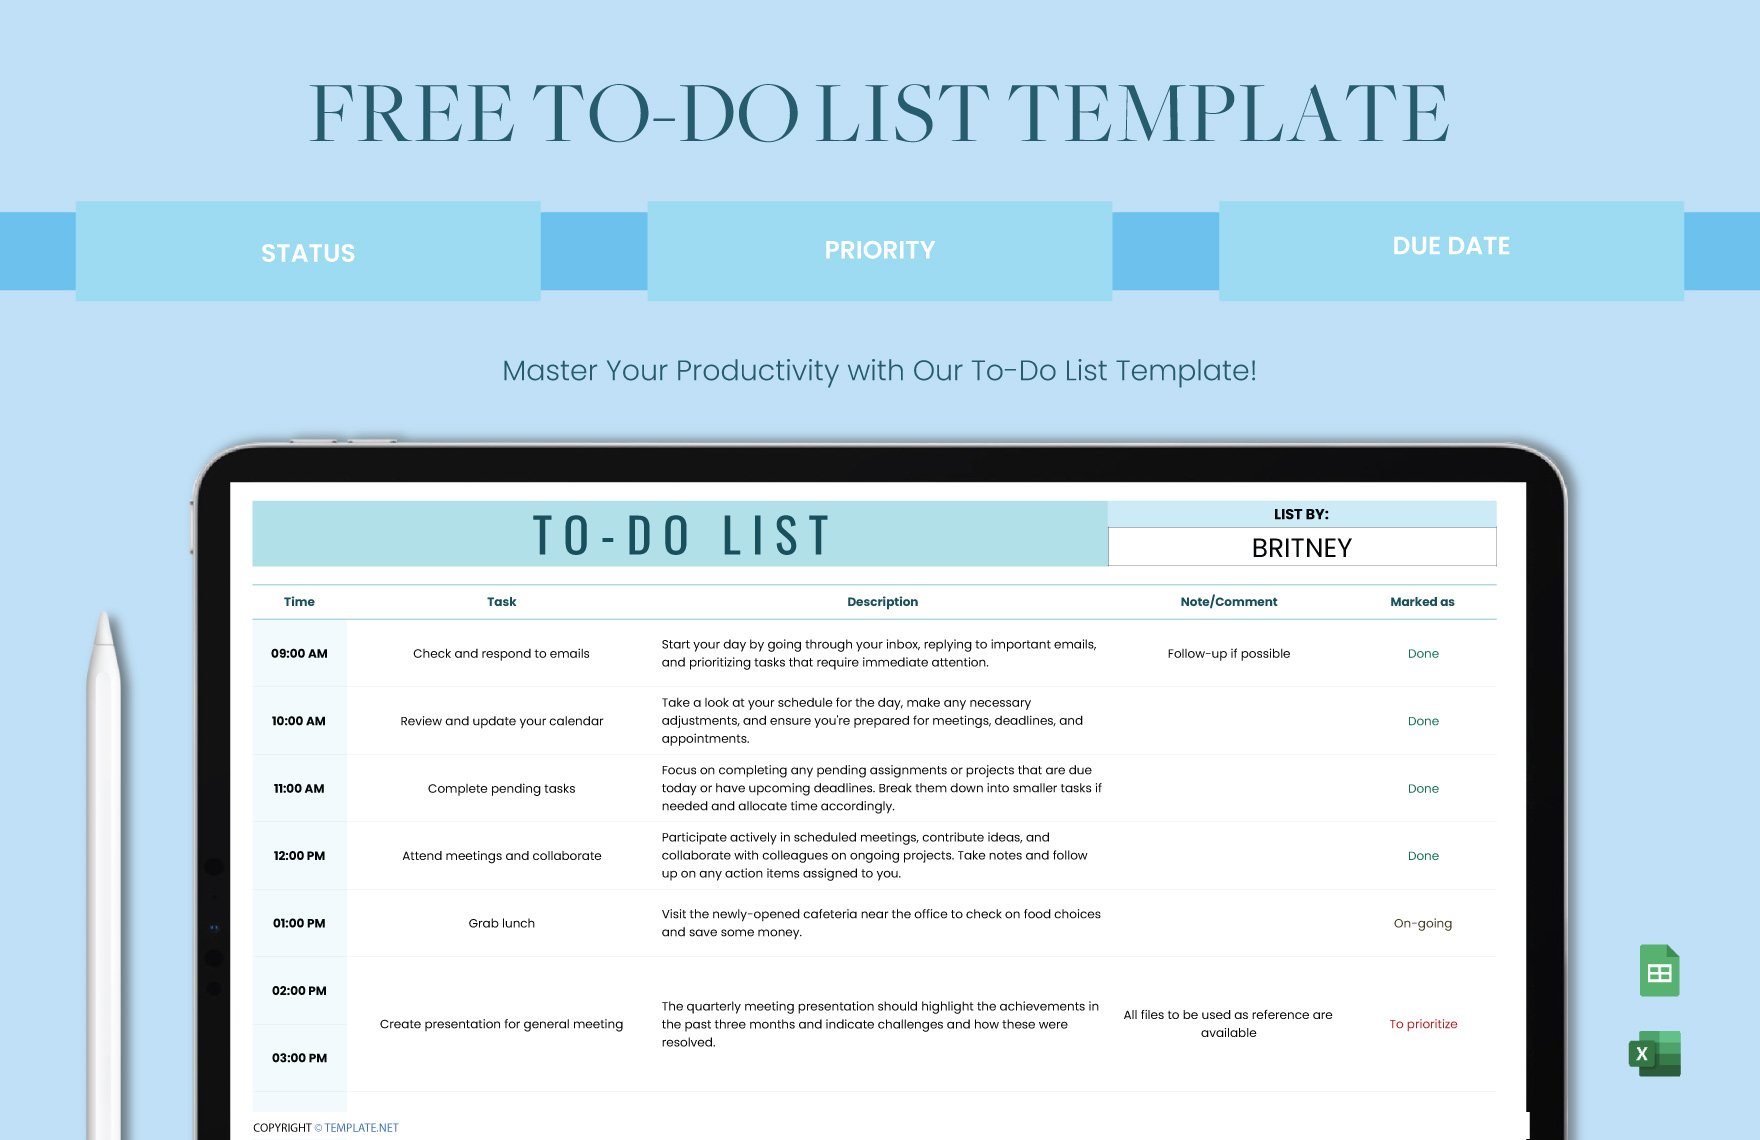 Free To-Do List Template